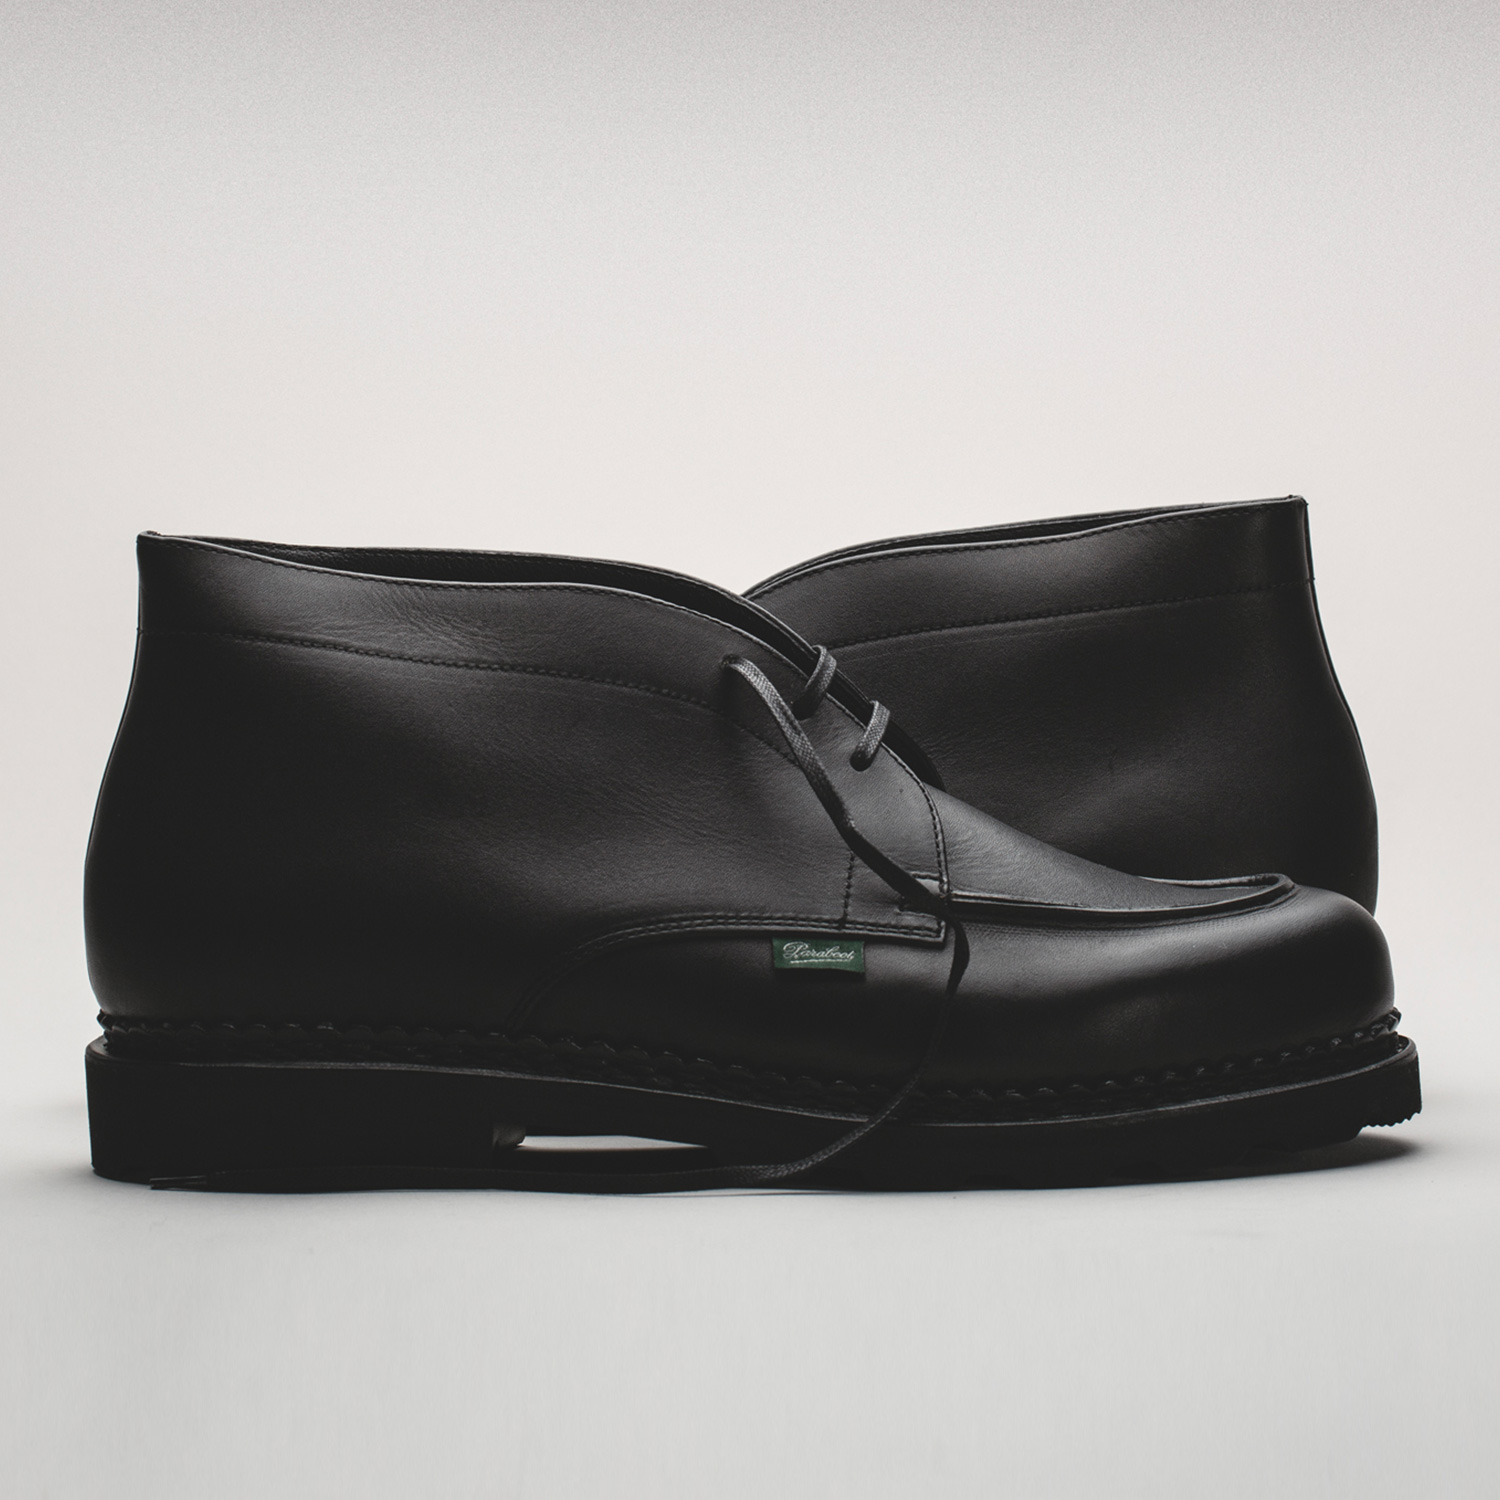 CHUKKA shoes in Black color by Arpenteur